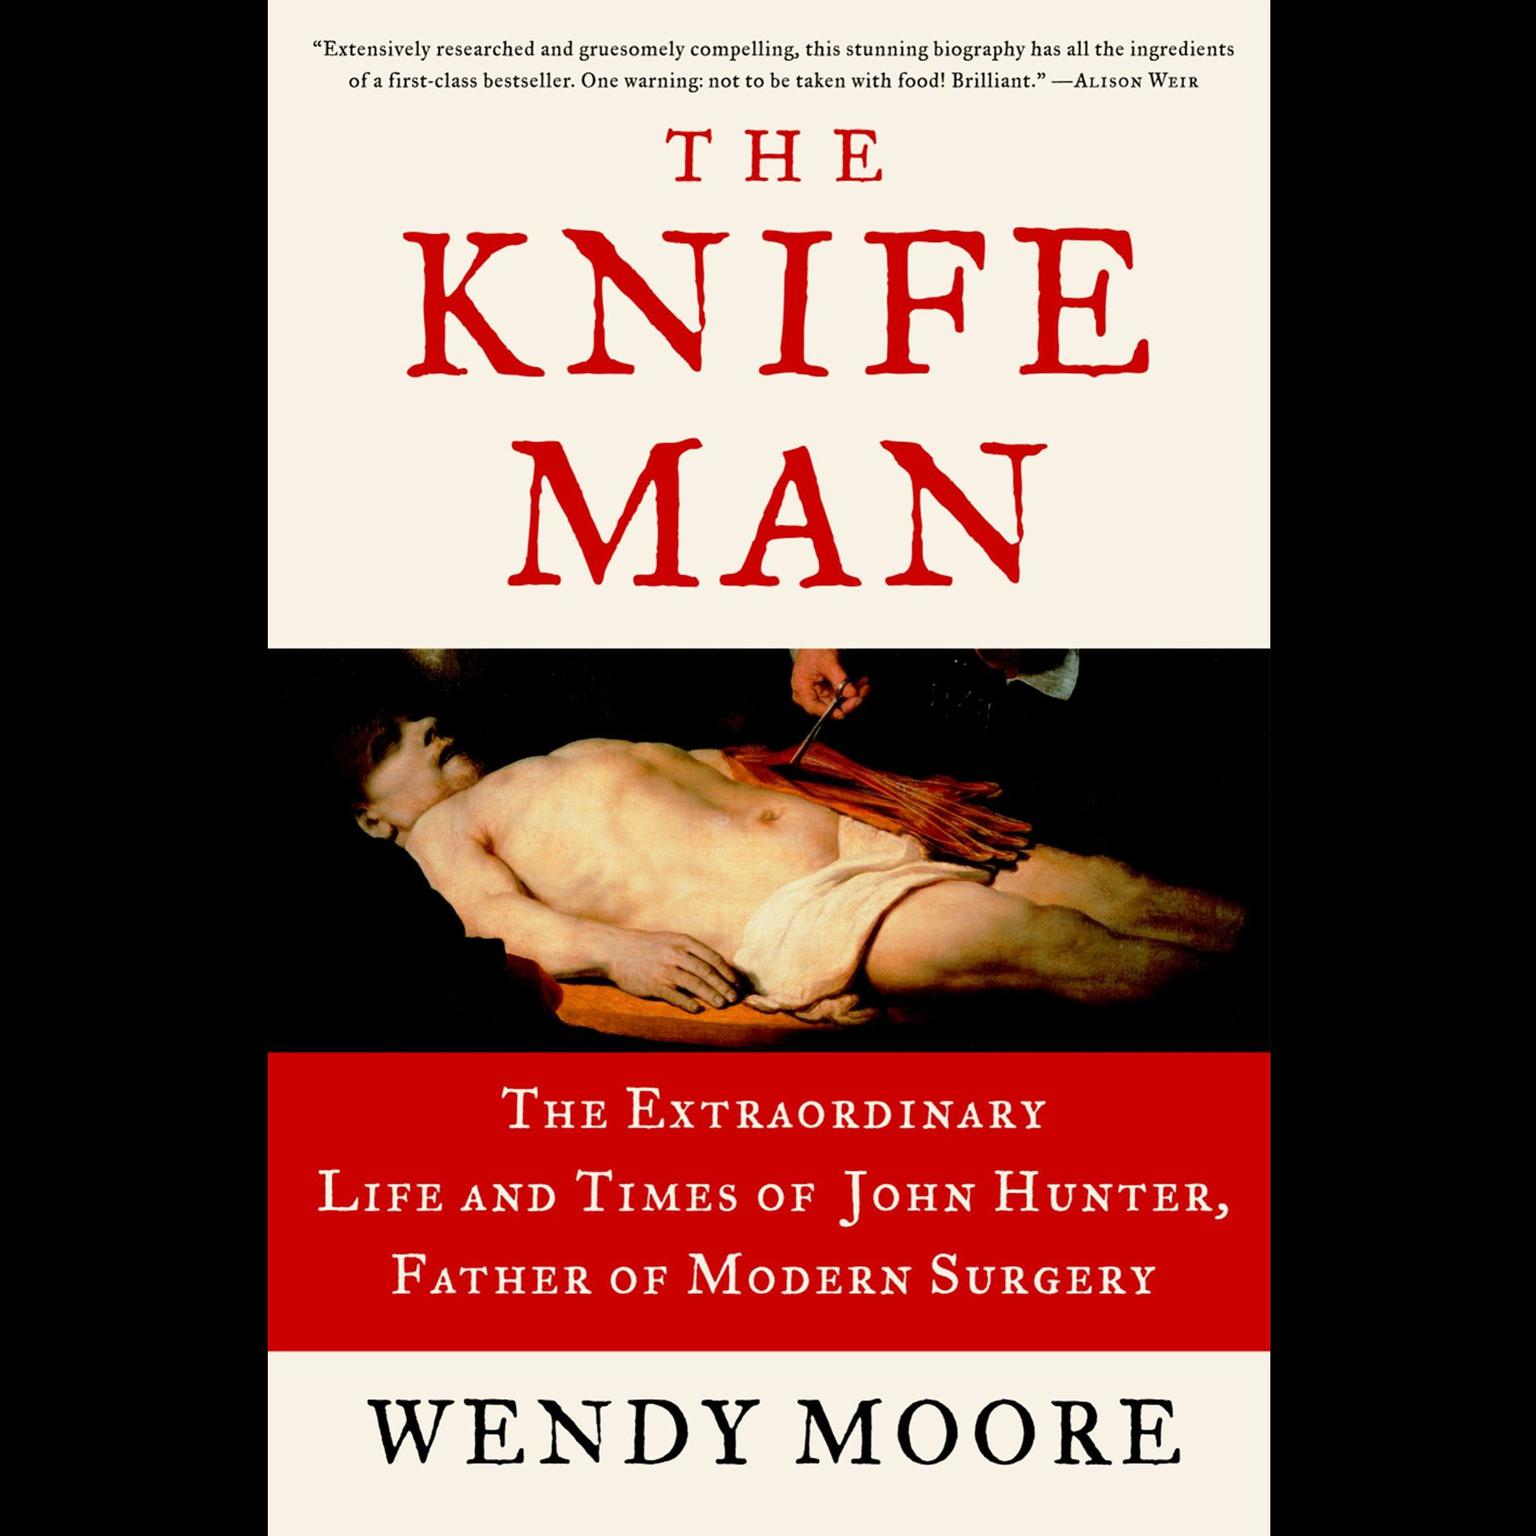 The Knife Man: The Extraordinary Life and Times of John Hunter, Father of Modern Surgery Audiobook, by Wendy Moore